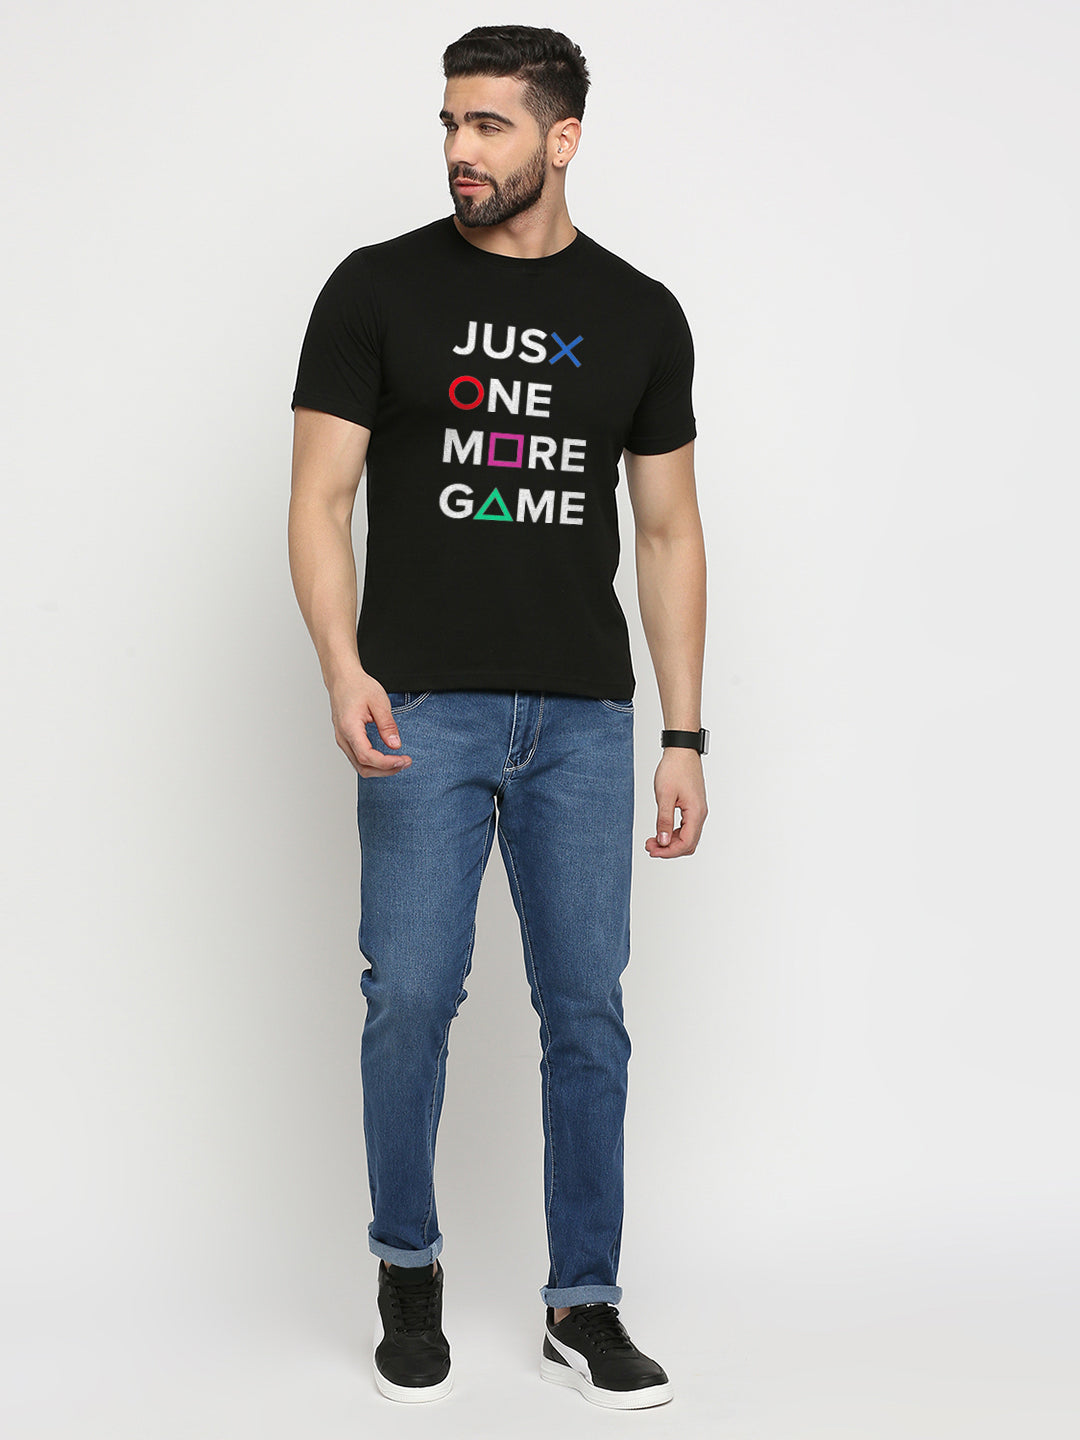 Just One More Game T-Shirt